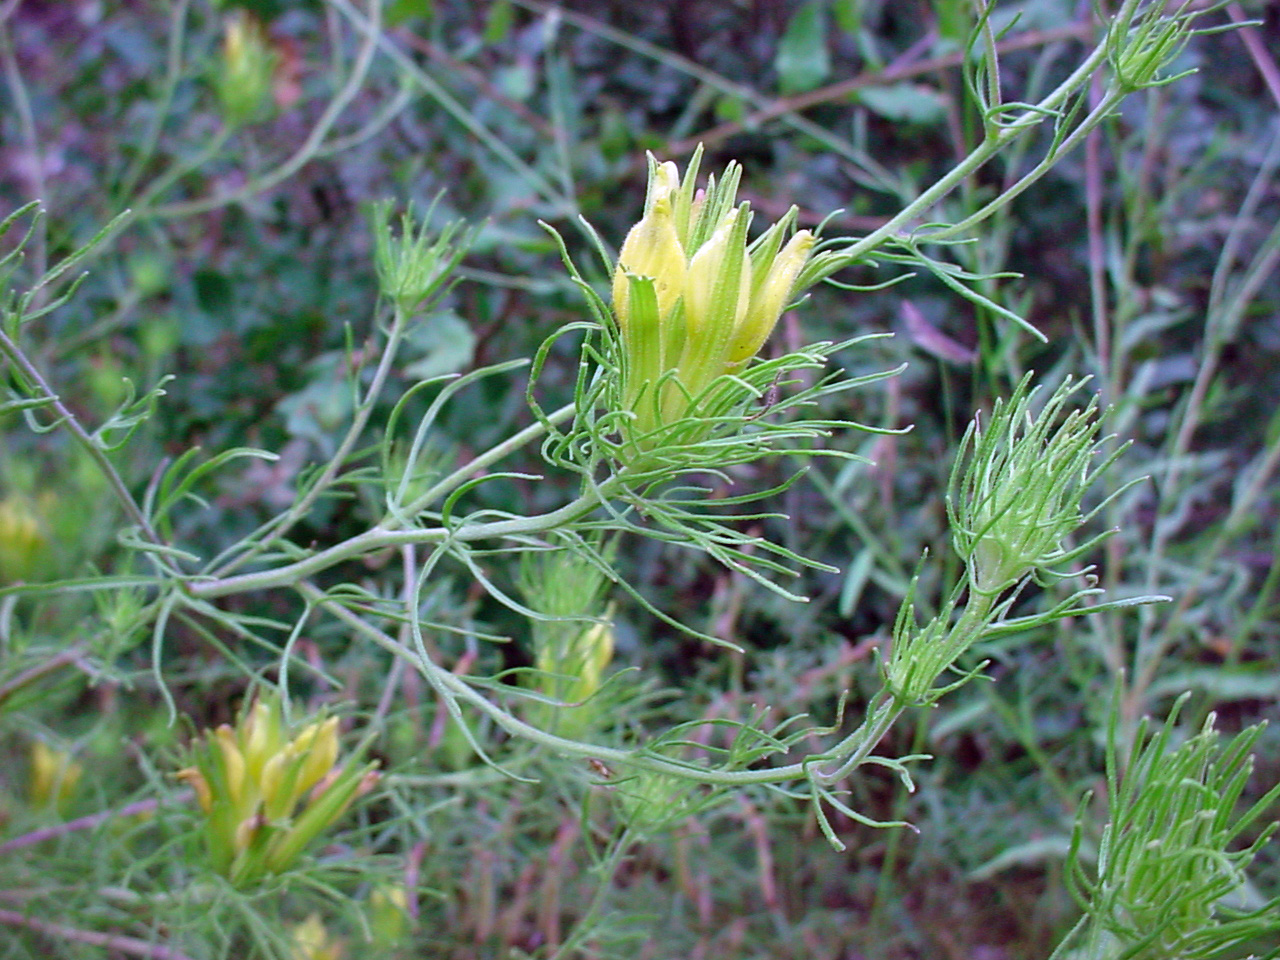 Cluster of yellow flowers and finely divided leaves